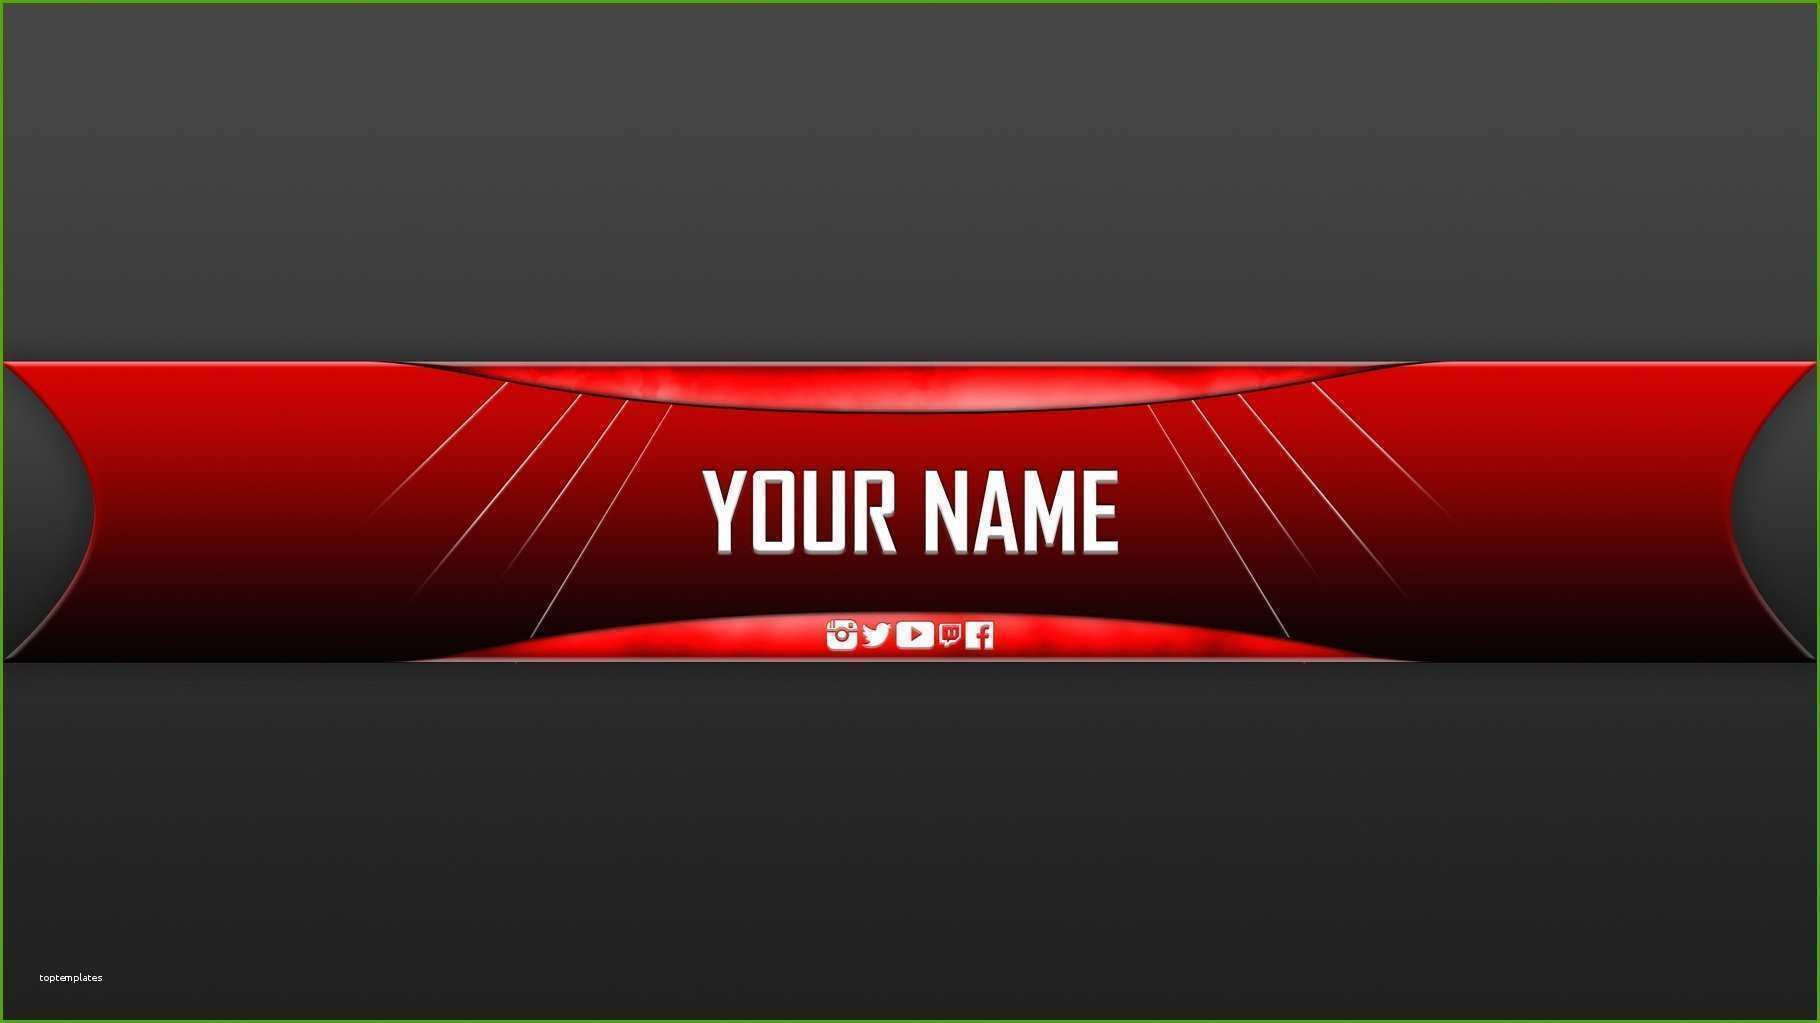 2560x1440 Youtube Banner Background Template Images 11042